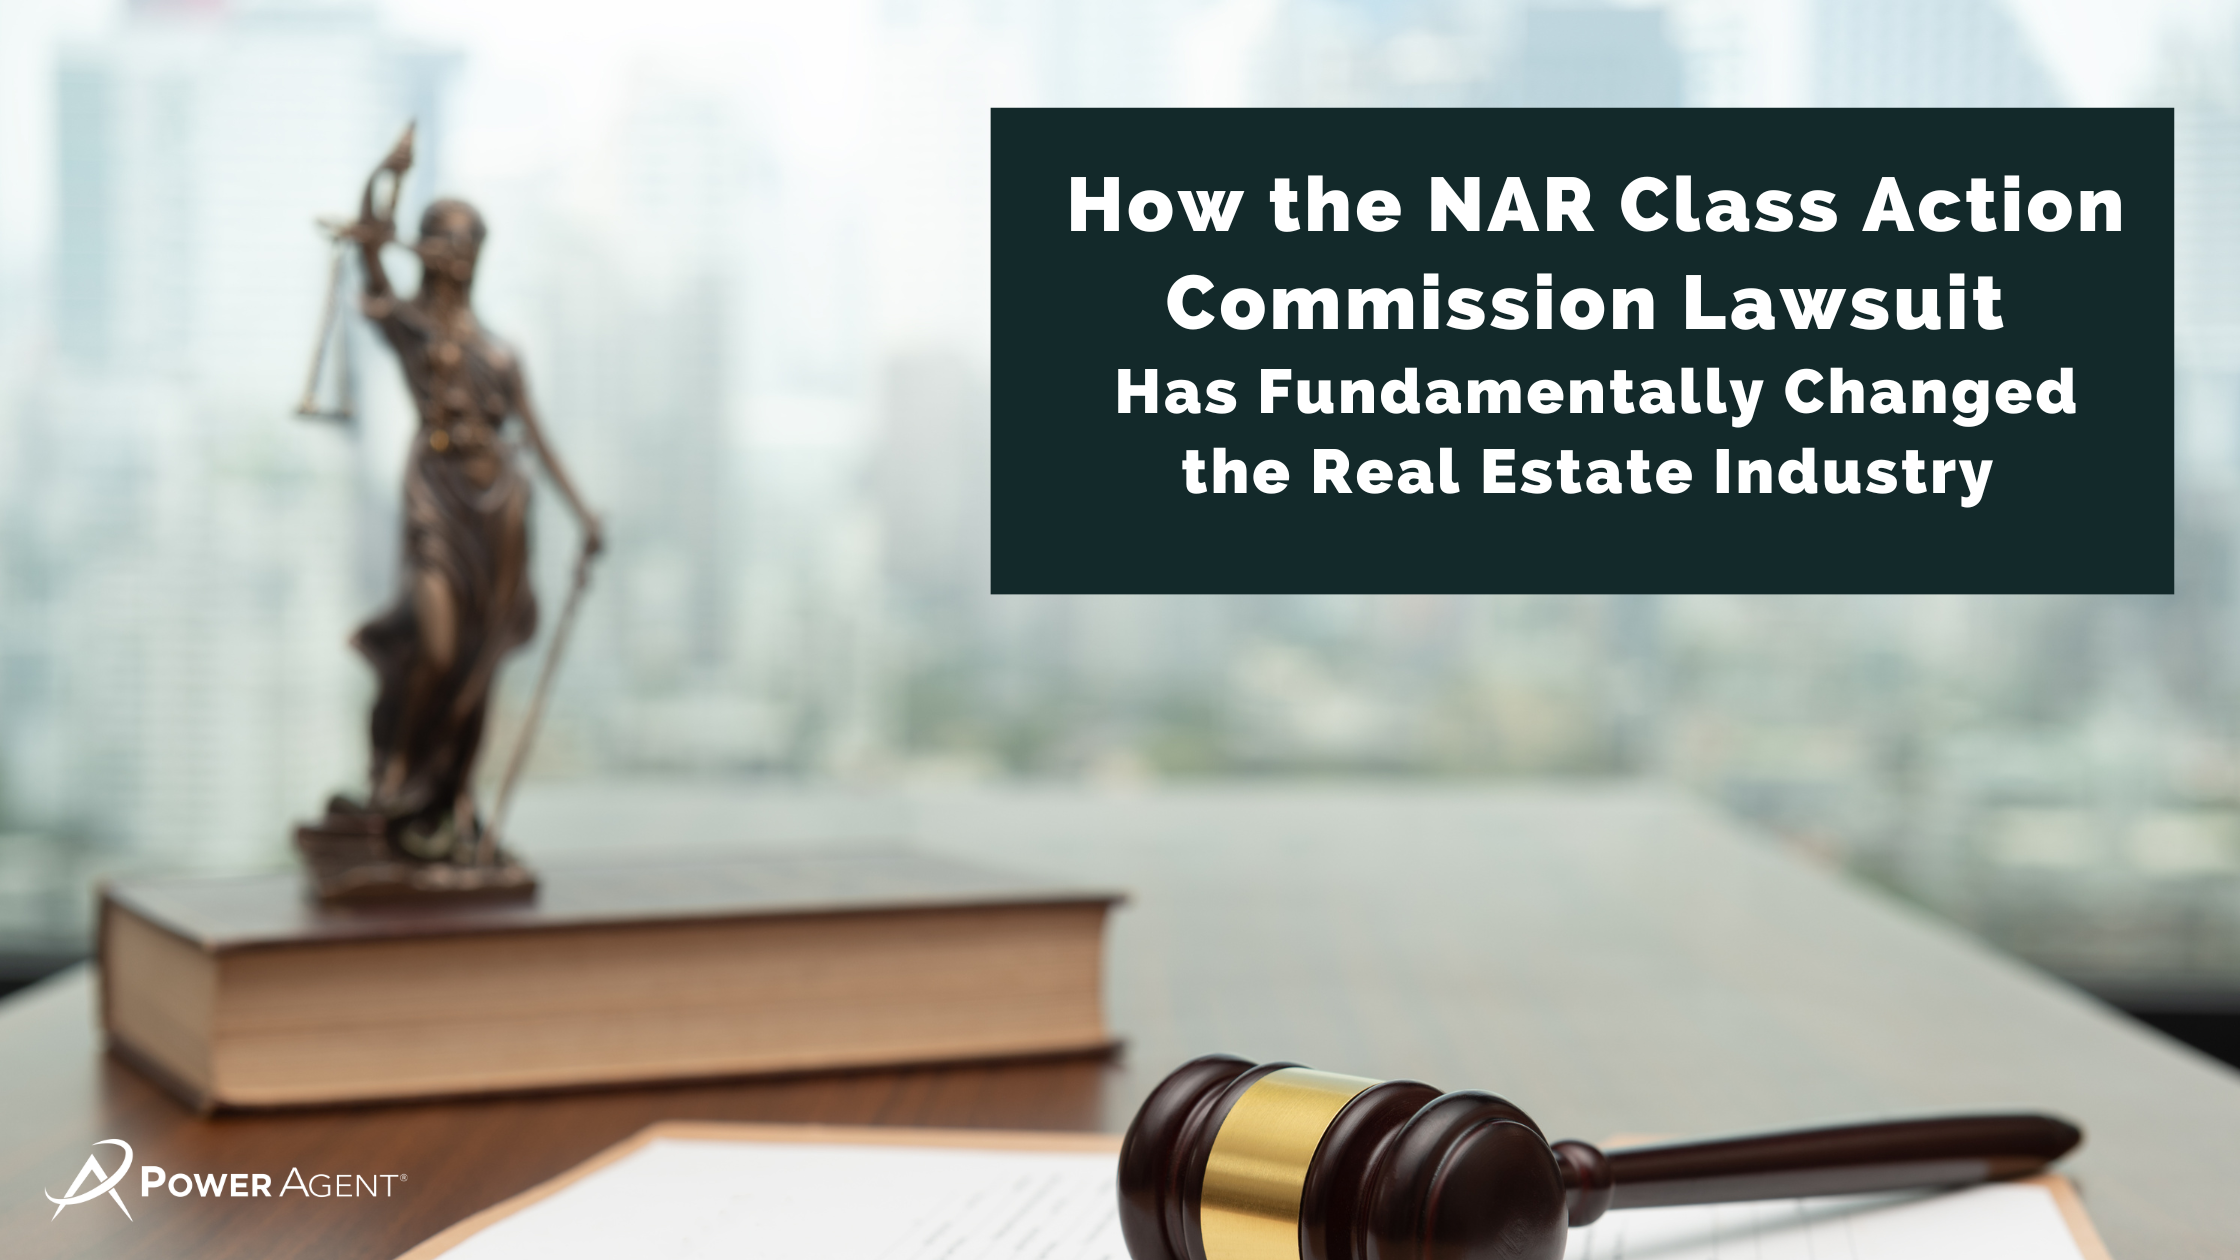 NAR Antitrust Commission Lawsuit Training and Tools